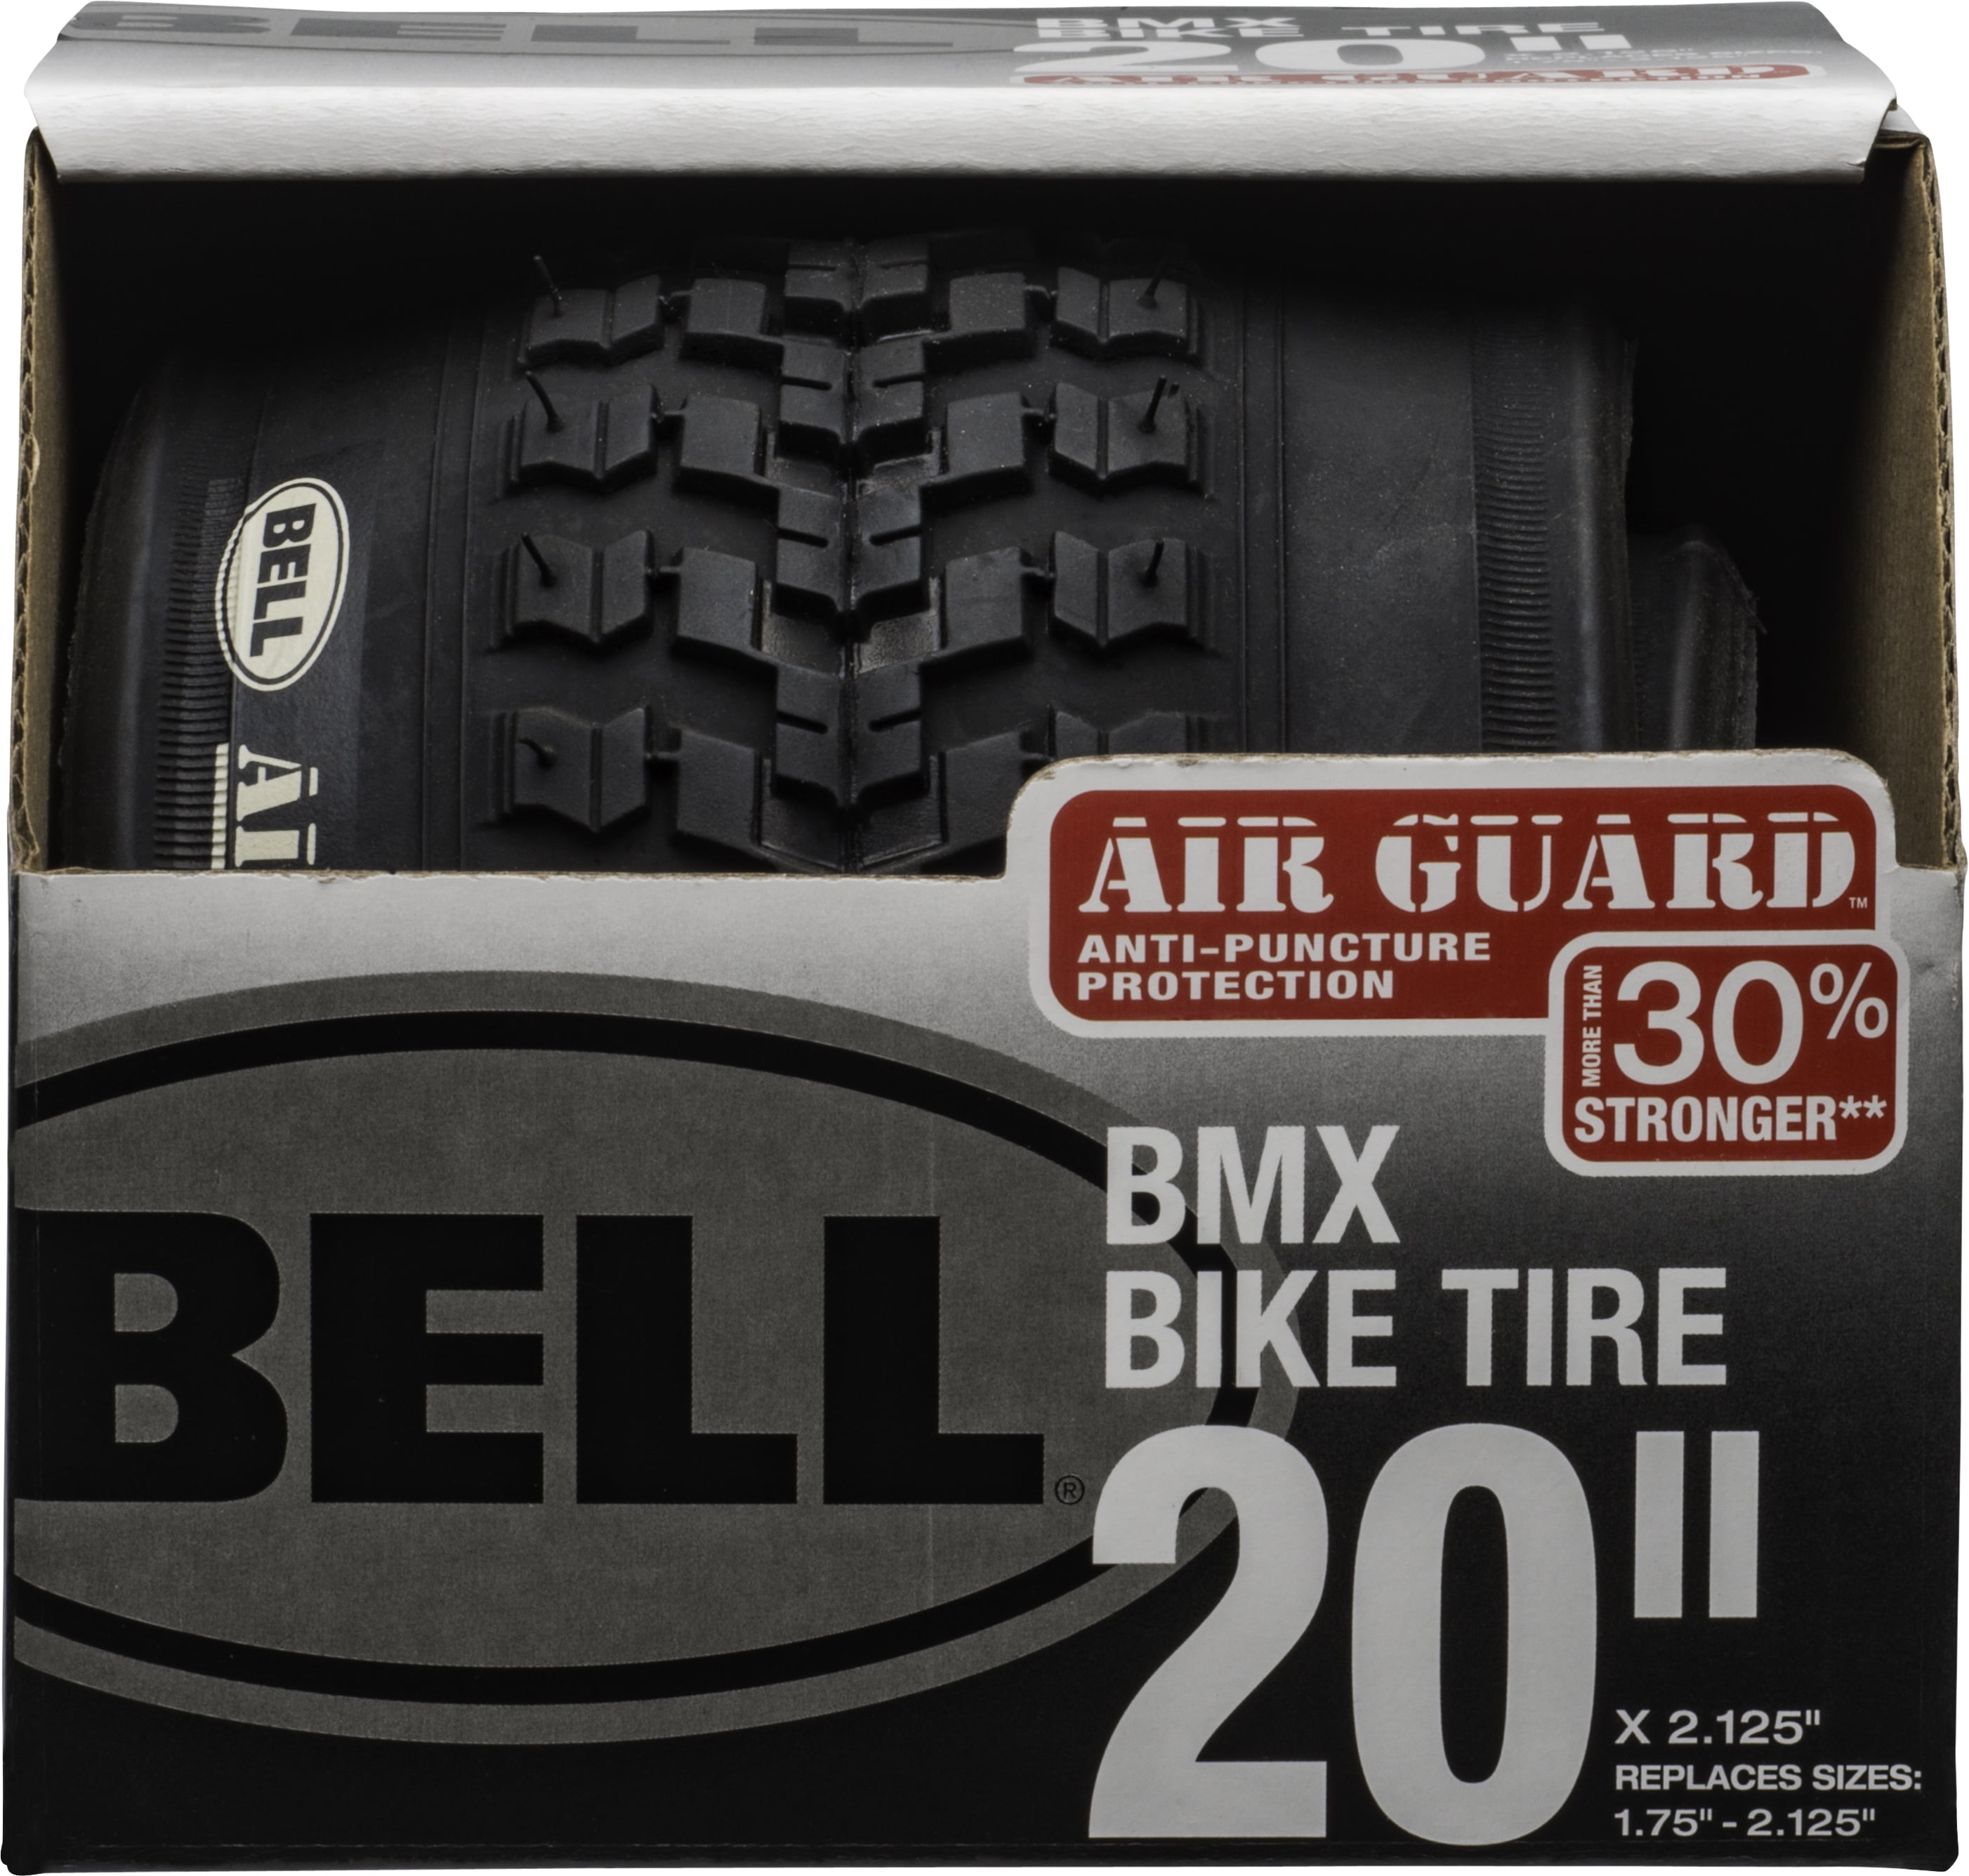 Bell Freestyle BMX Bike Tire 20" x 2.0" Black Air Guard Anti-Puncture NEW IN BOX 